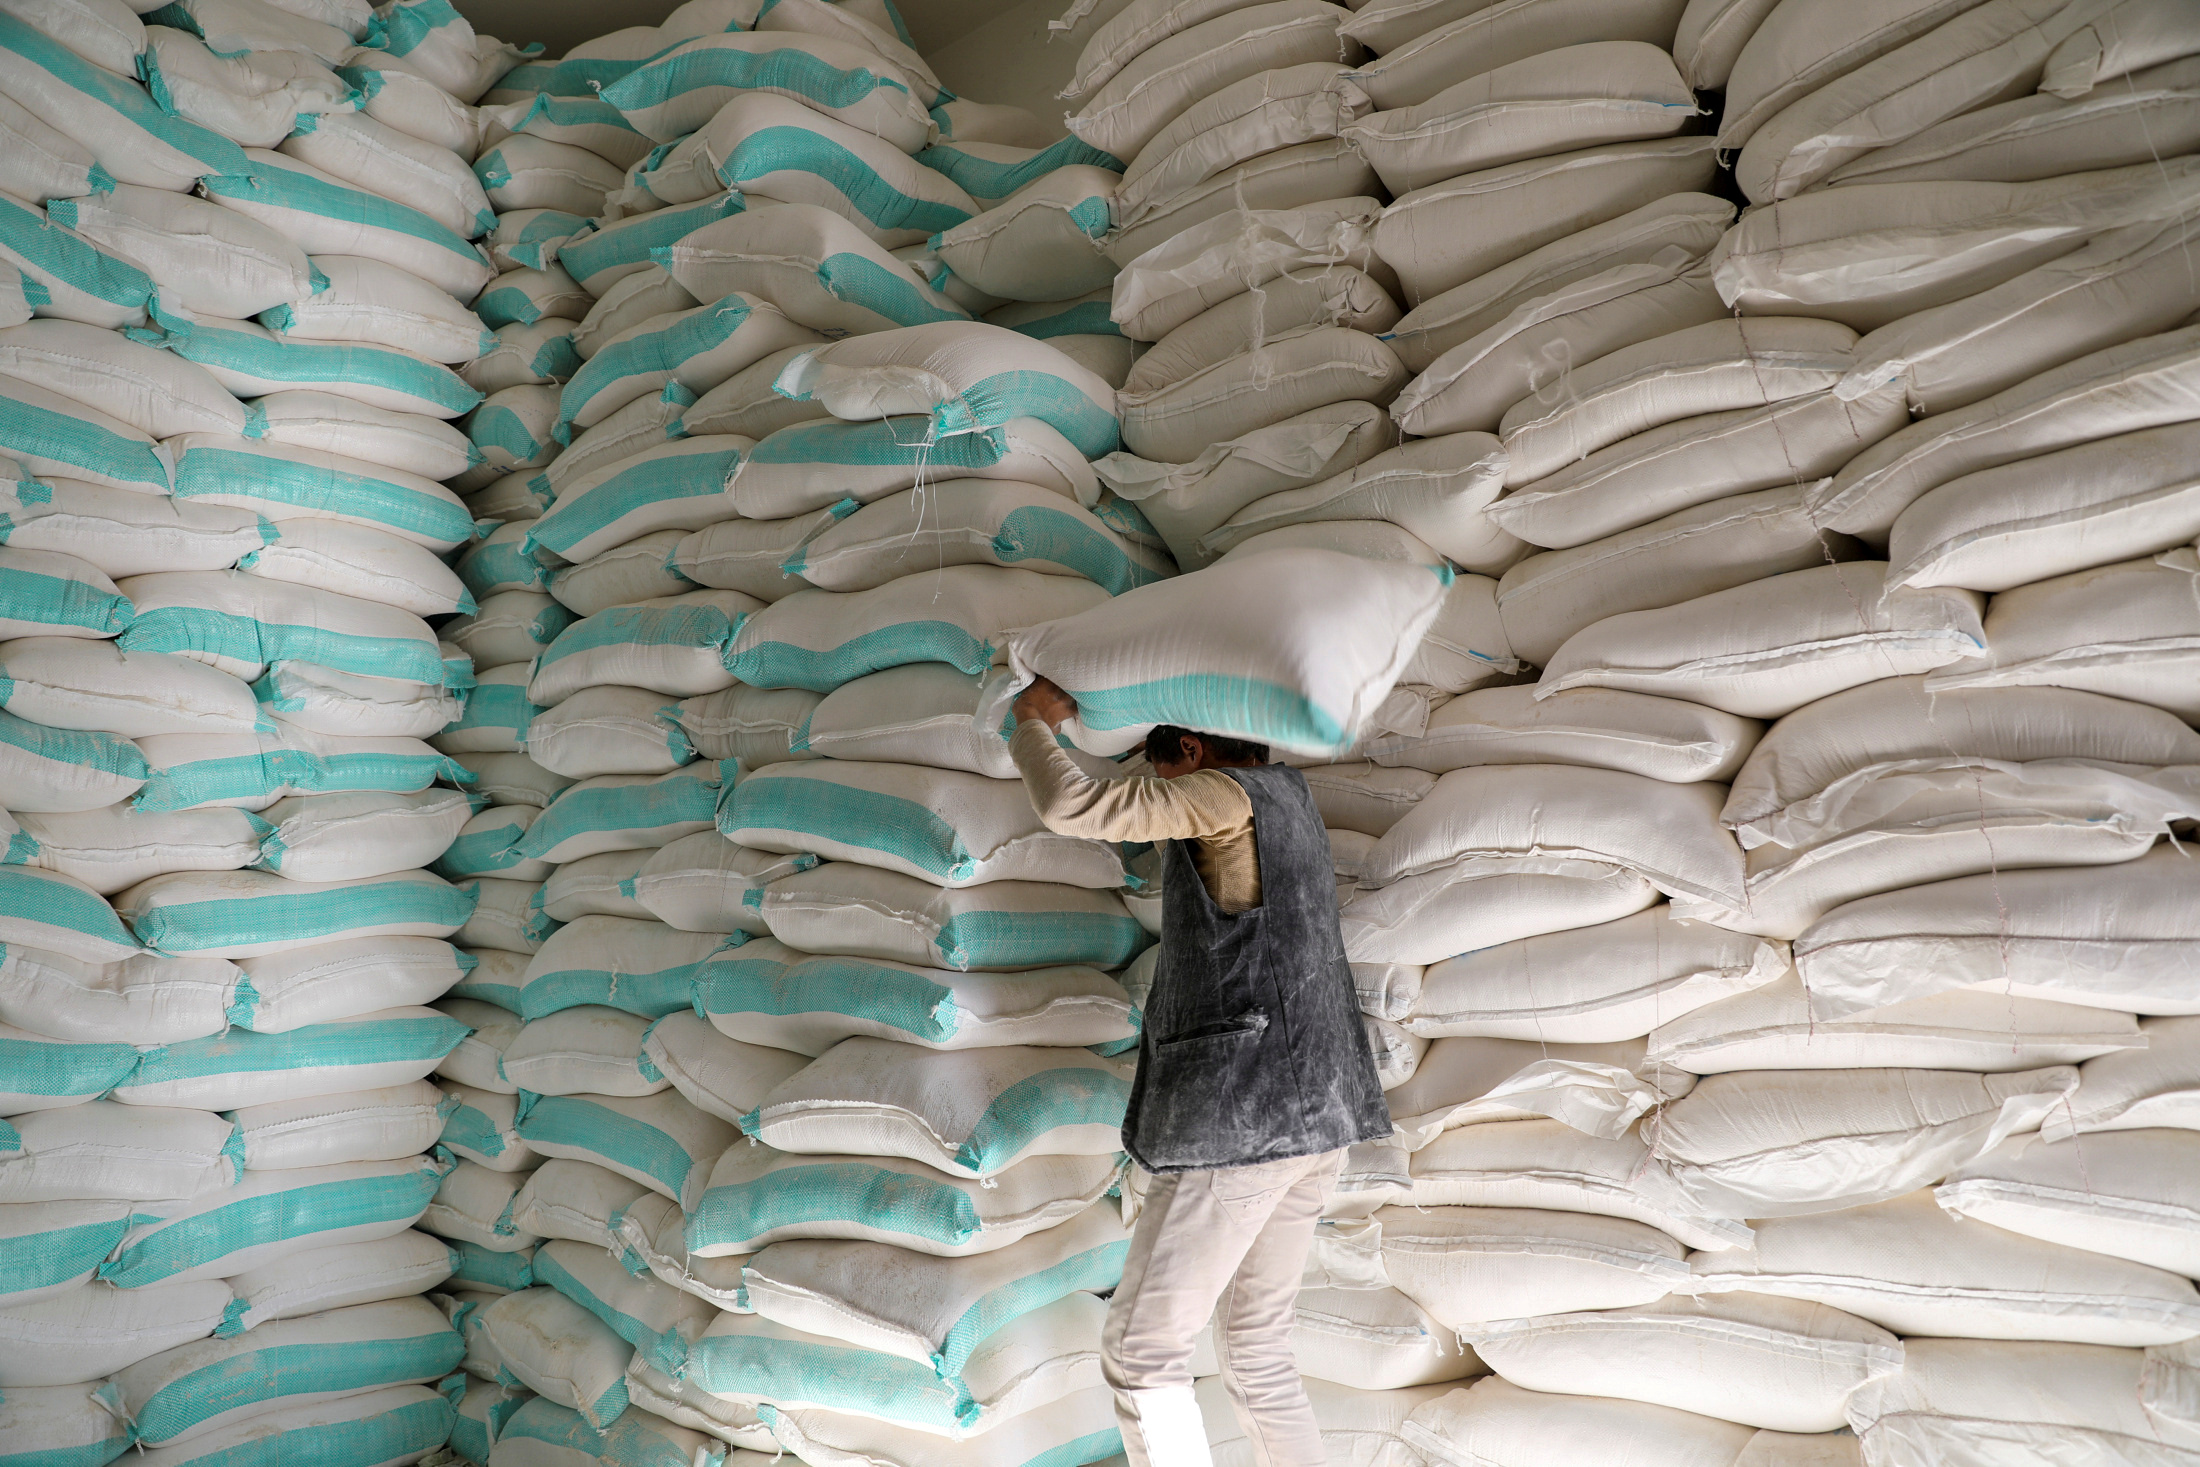 A worker carries a sack of wheat flour at a World Food Programme food aid distribution center in Sanaa